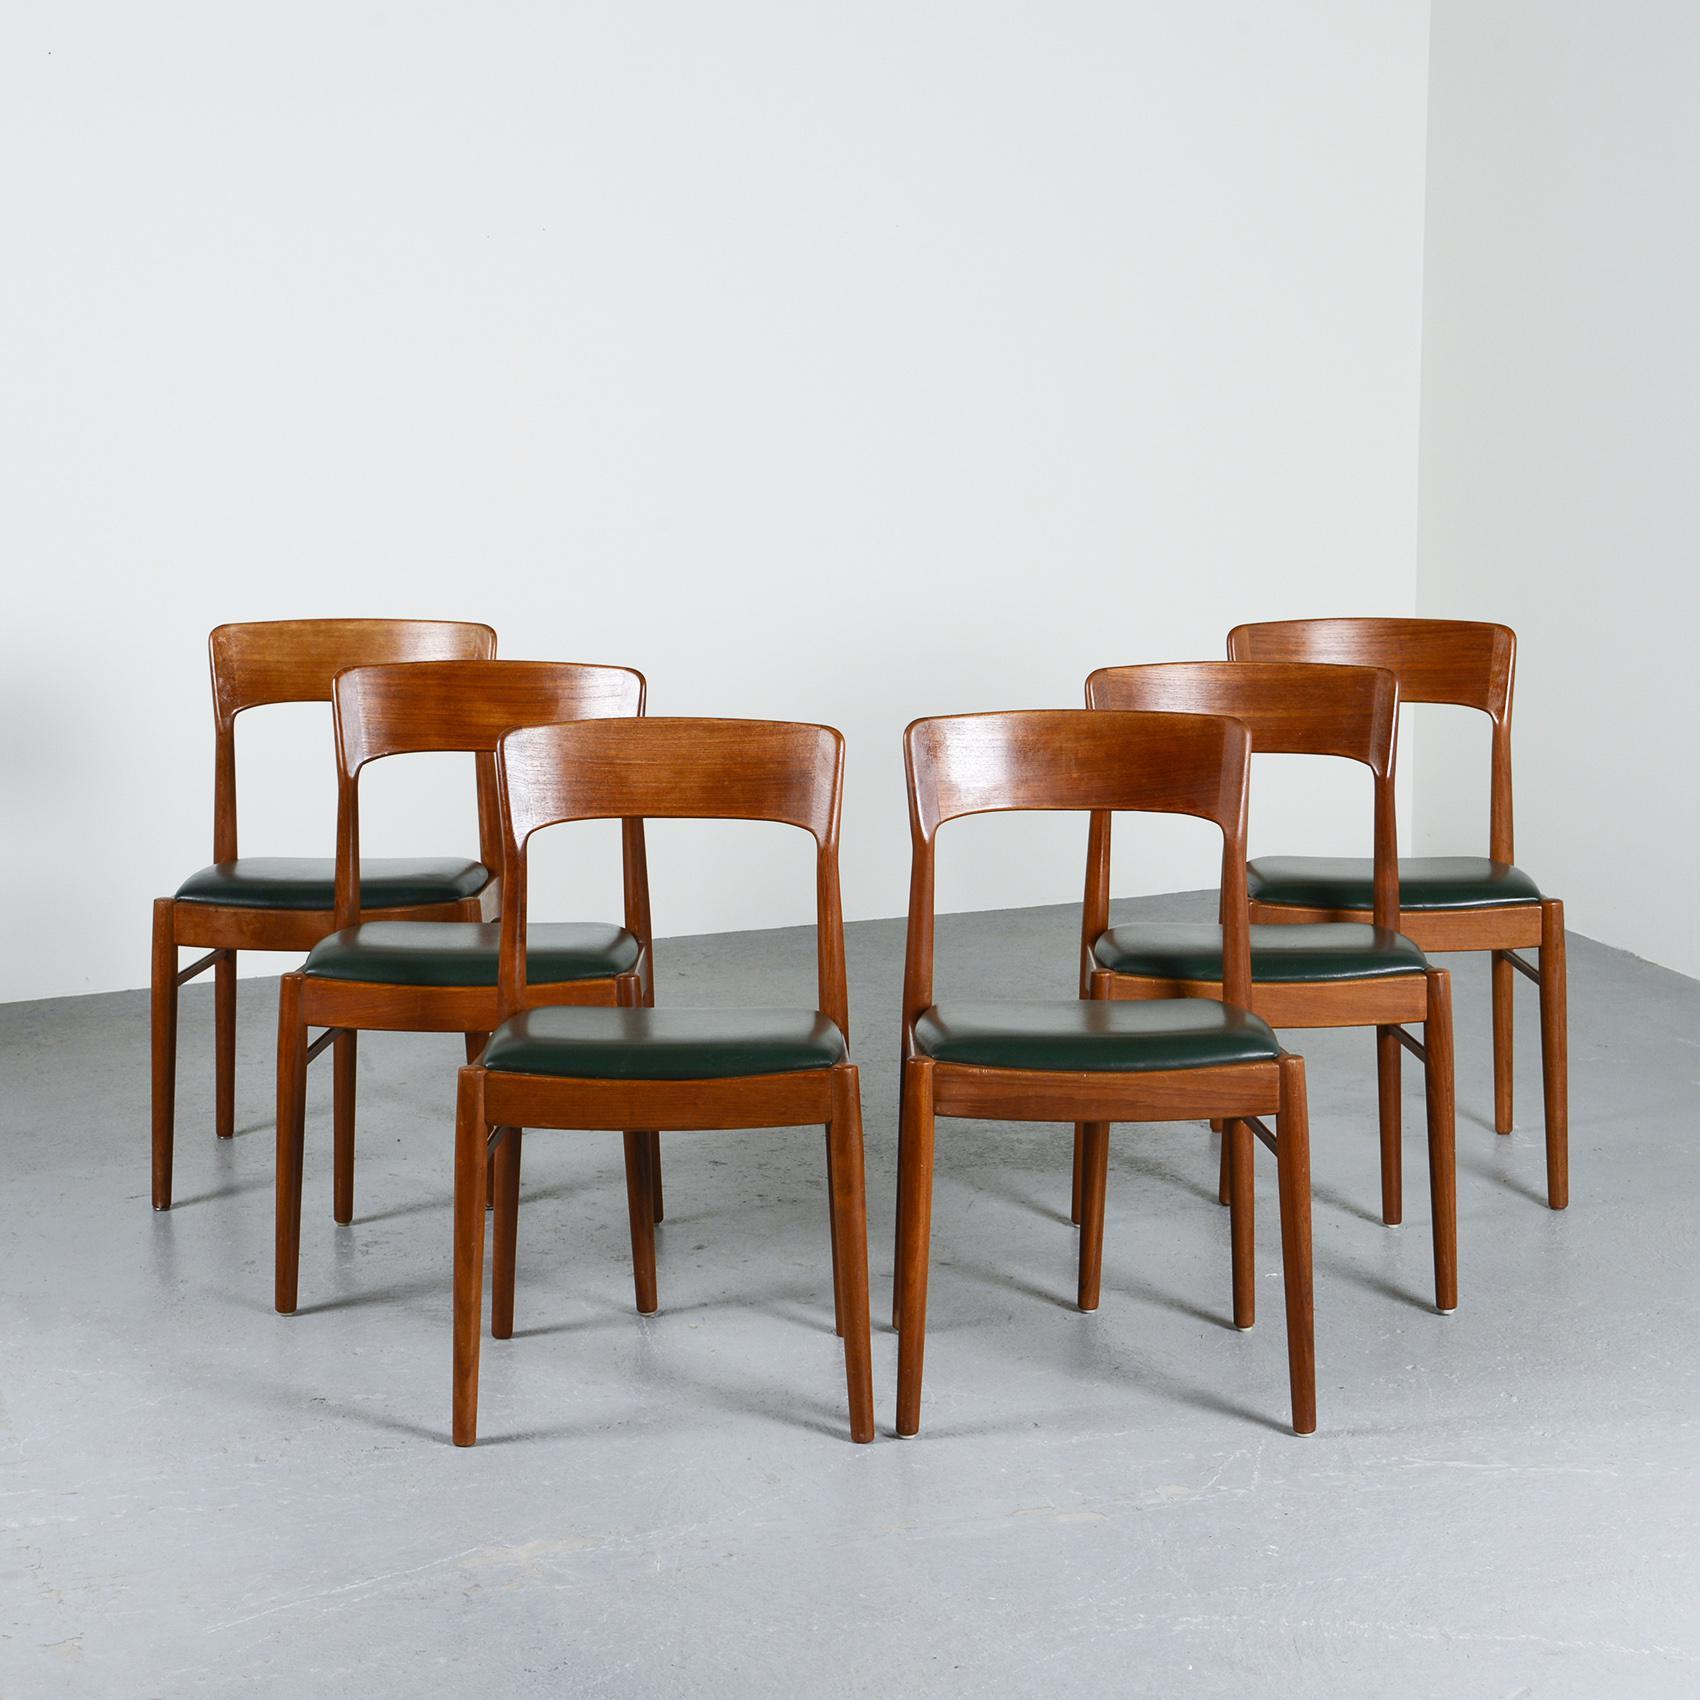 Set of six dining chairs were designed by Henning Kjærnulf in the 1960s, boasting a set of six pieces. 

The chairs are constructed with a robust teak frame that features four gently rounded legs and a curved banded backrest. Additionally, each